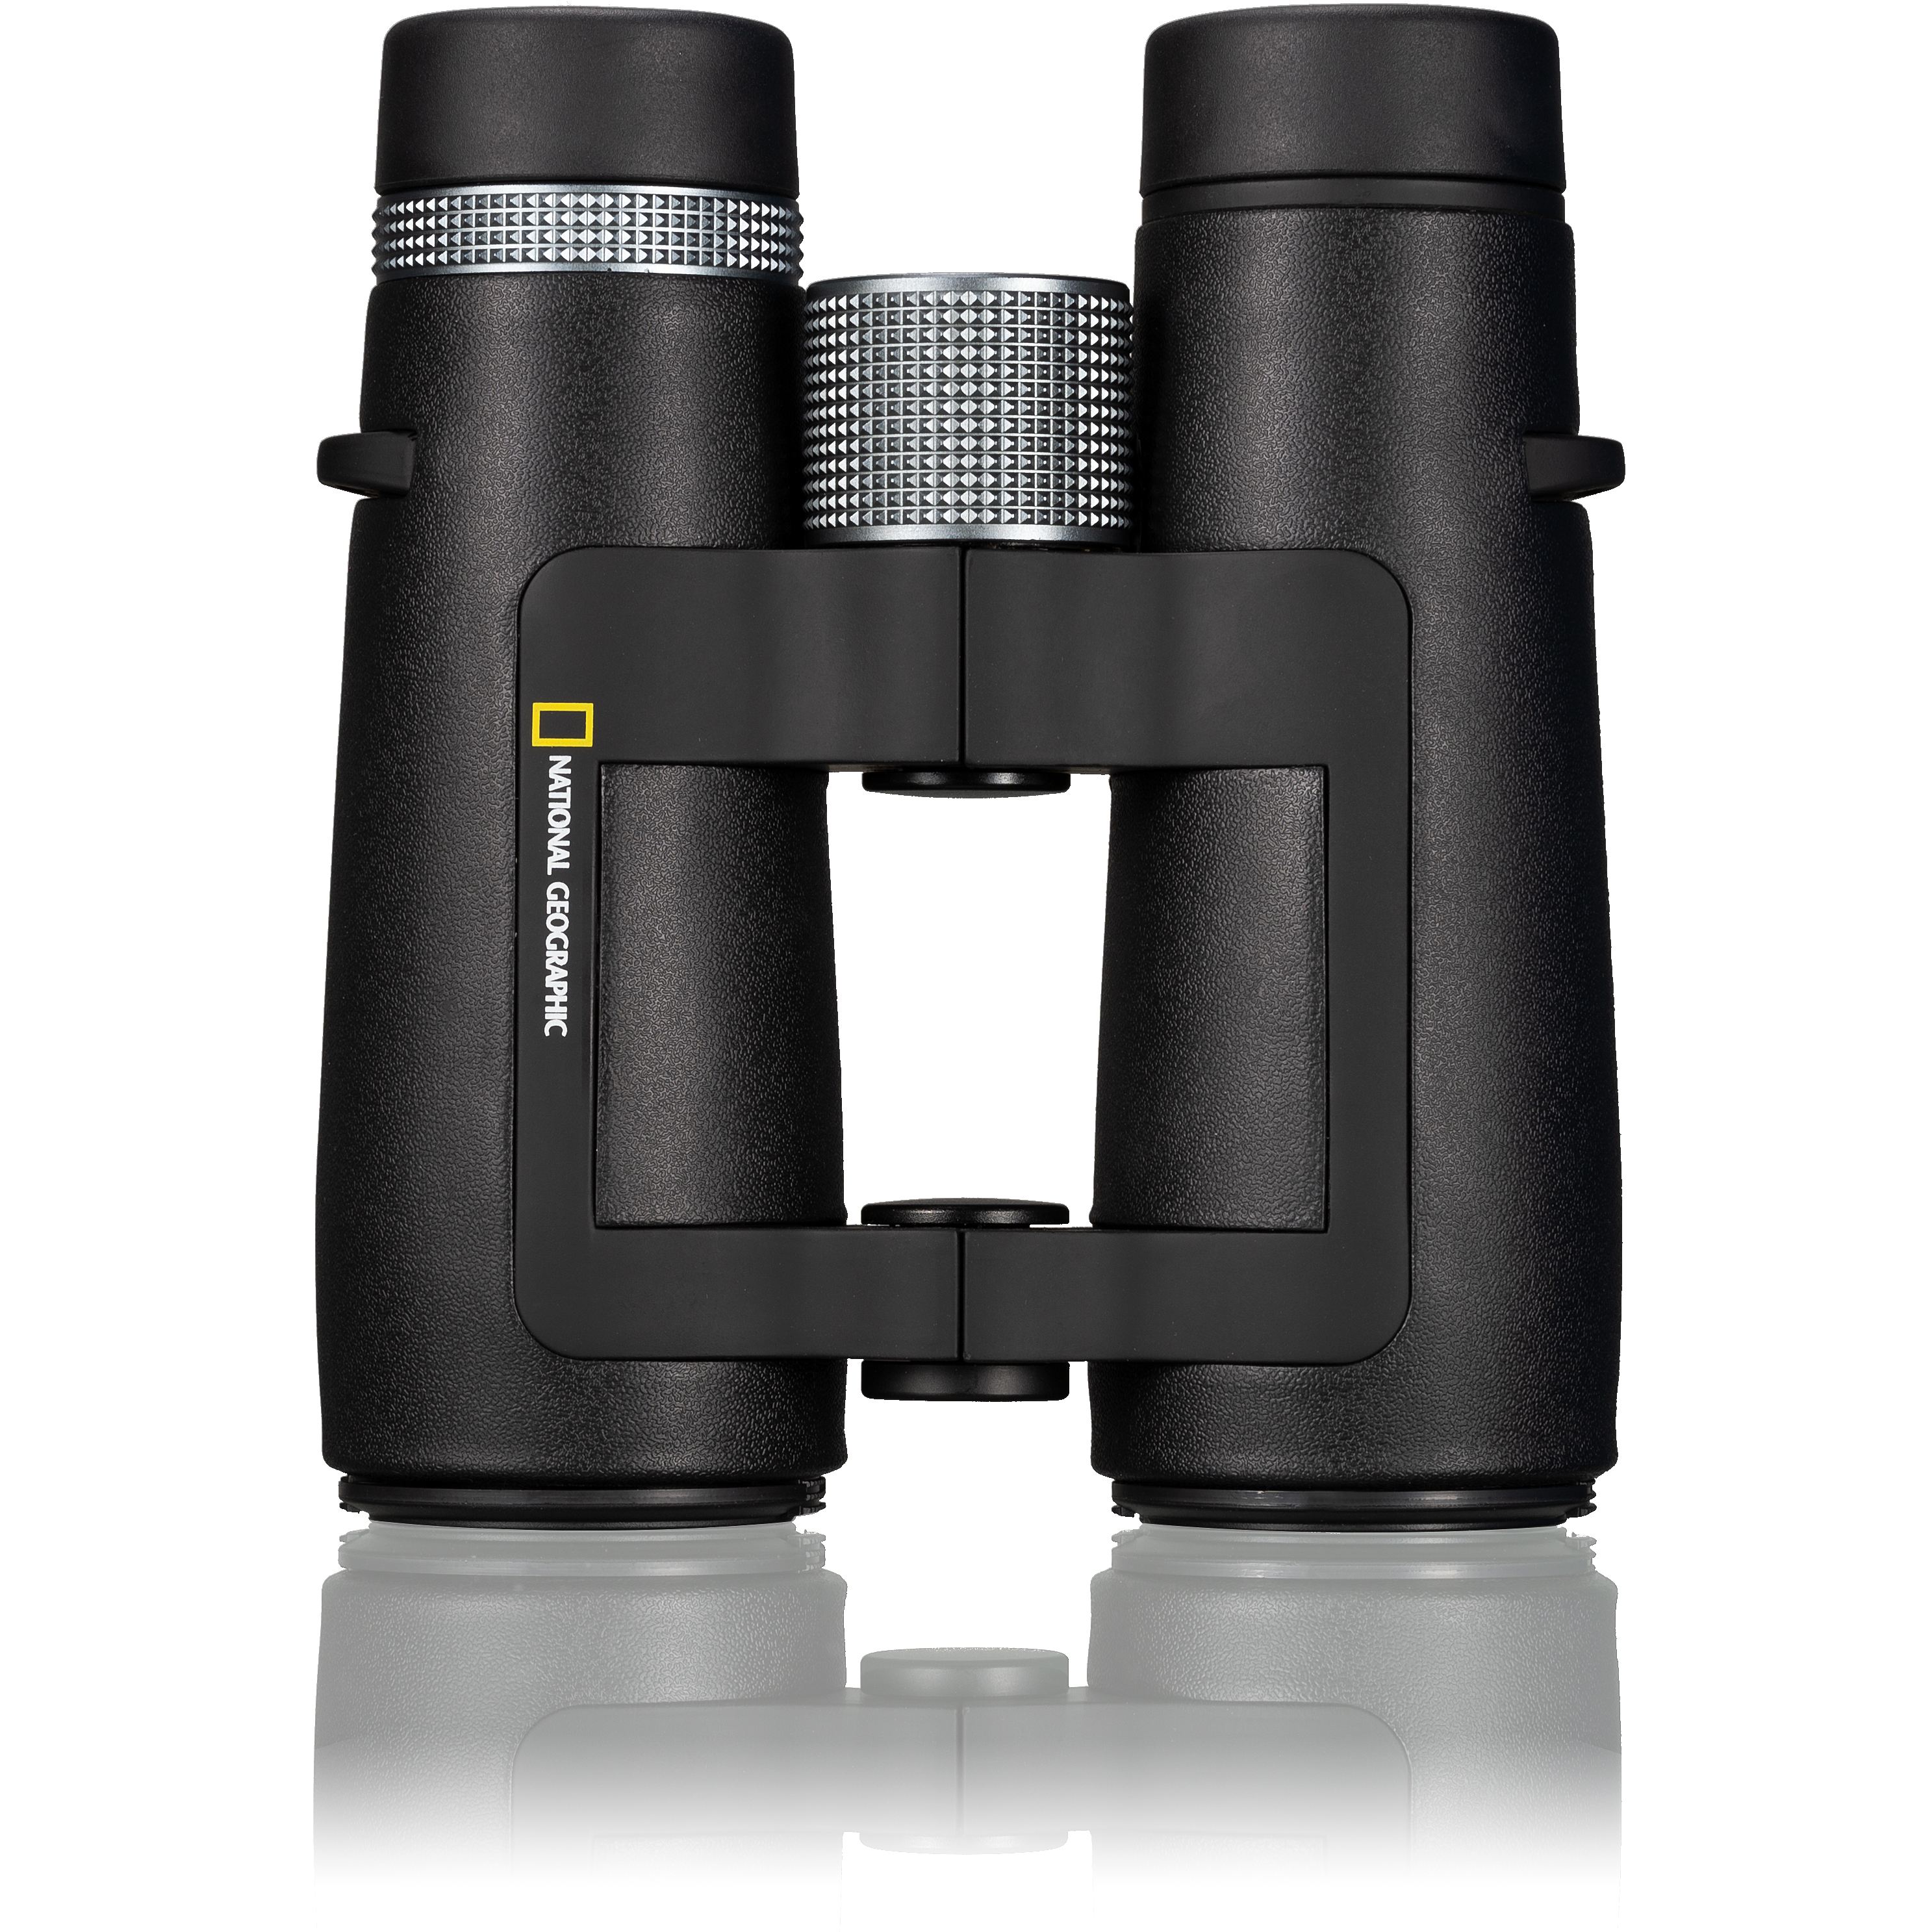 NATIONAL GEOGRAPHIC Trueview NG 10x42 binoculars with special open bridge